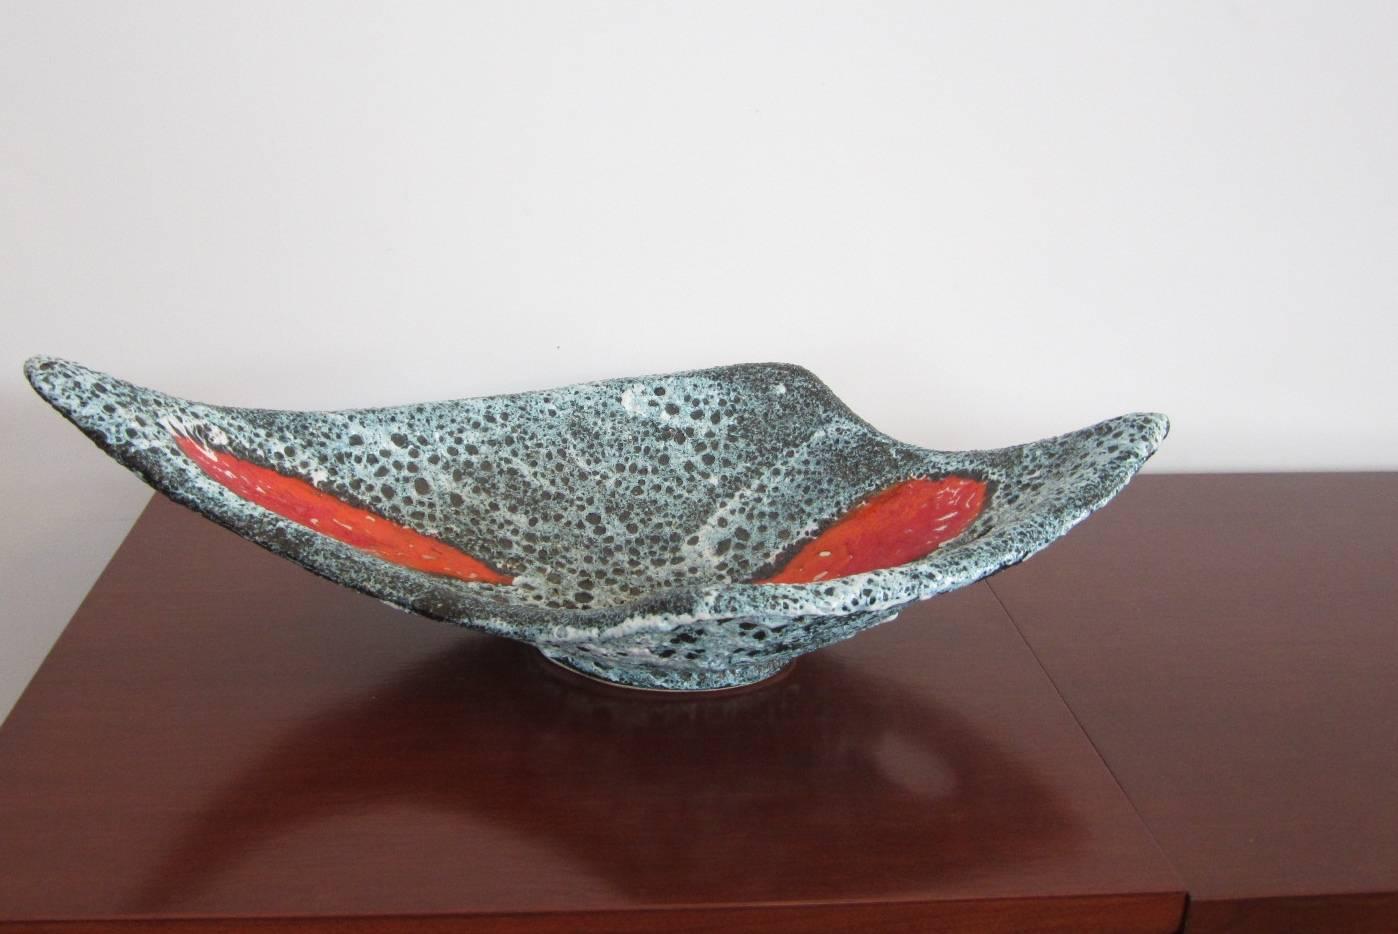 Handmade pottery bowl with lava finish and patches of orange glaze design on the interior along with a cut-out design. Beautifully flared and swooped.